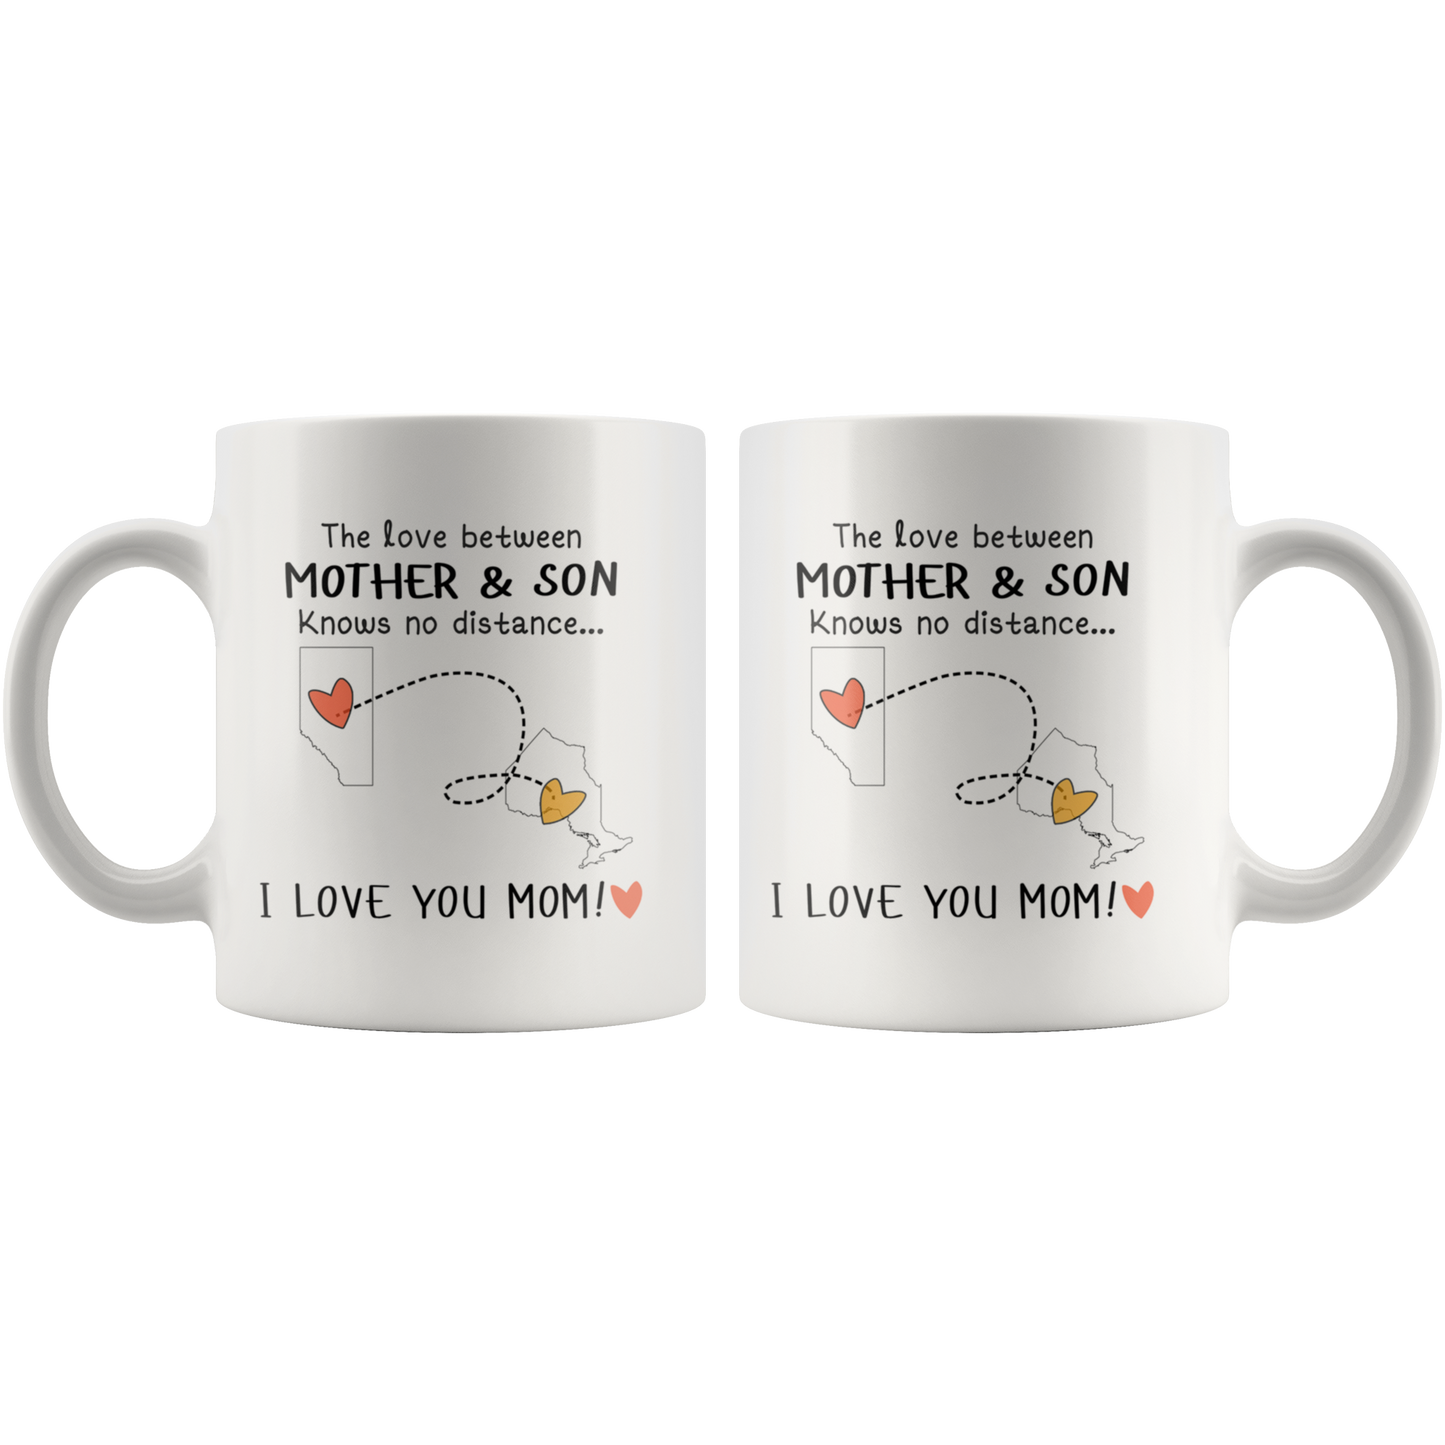 MUG0120547161-sp-23767 - [ Alberta | Ontario ]Mothers Day Gifts from Son - The Love Between Mother and So